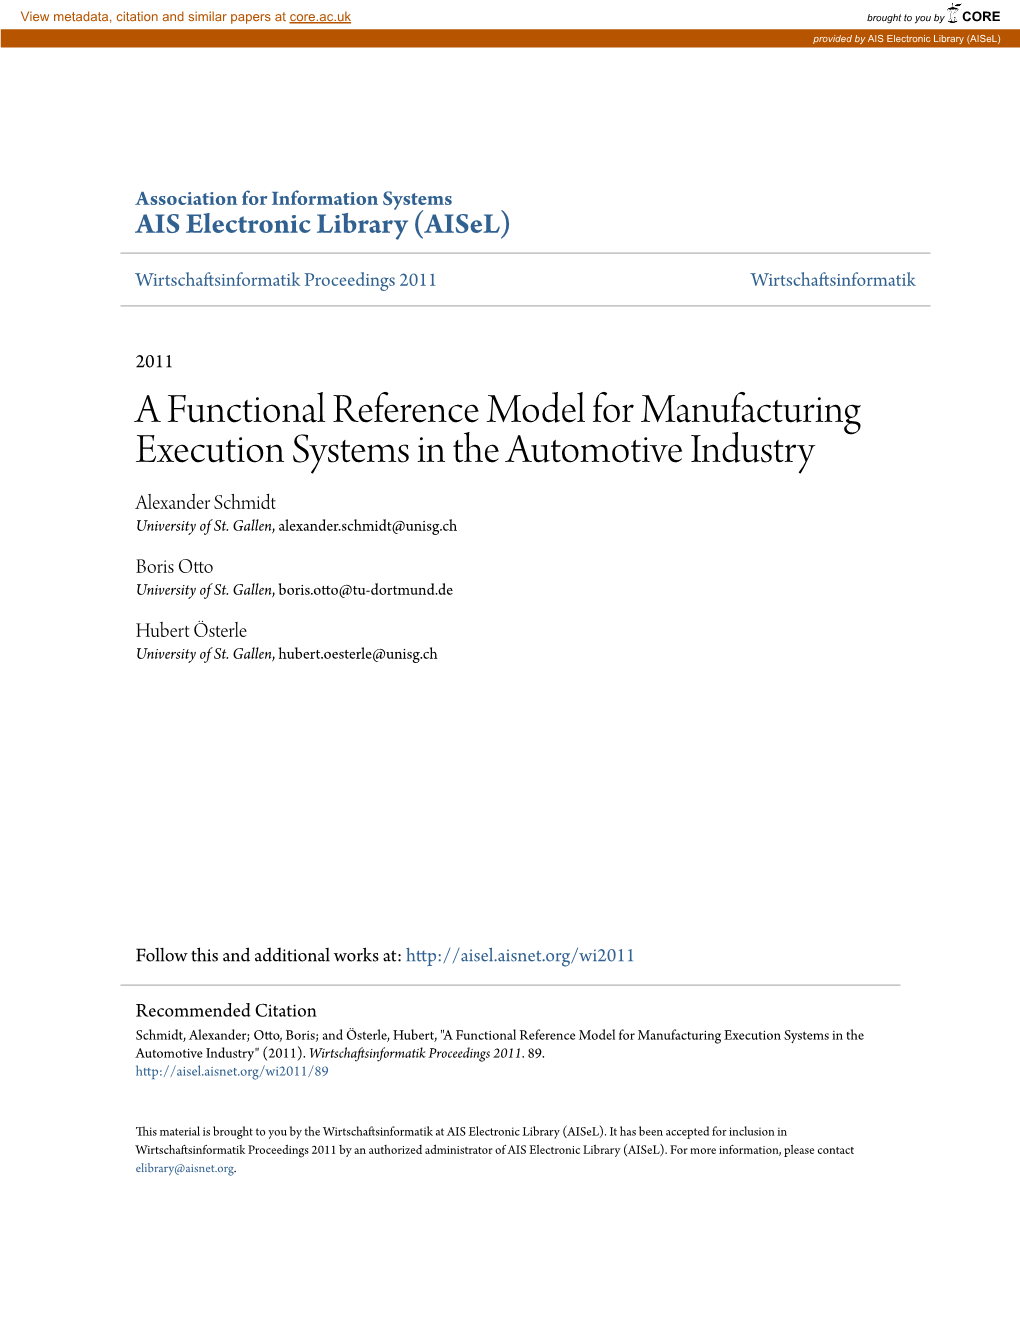 A Functional Reference Model for Manufacturing Execution Systems in the Automotive Industry Alexander Schmidt University of St